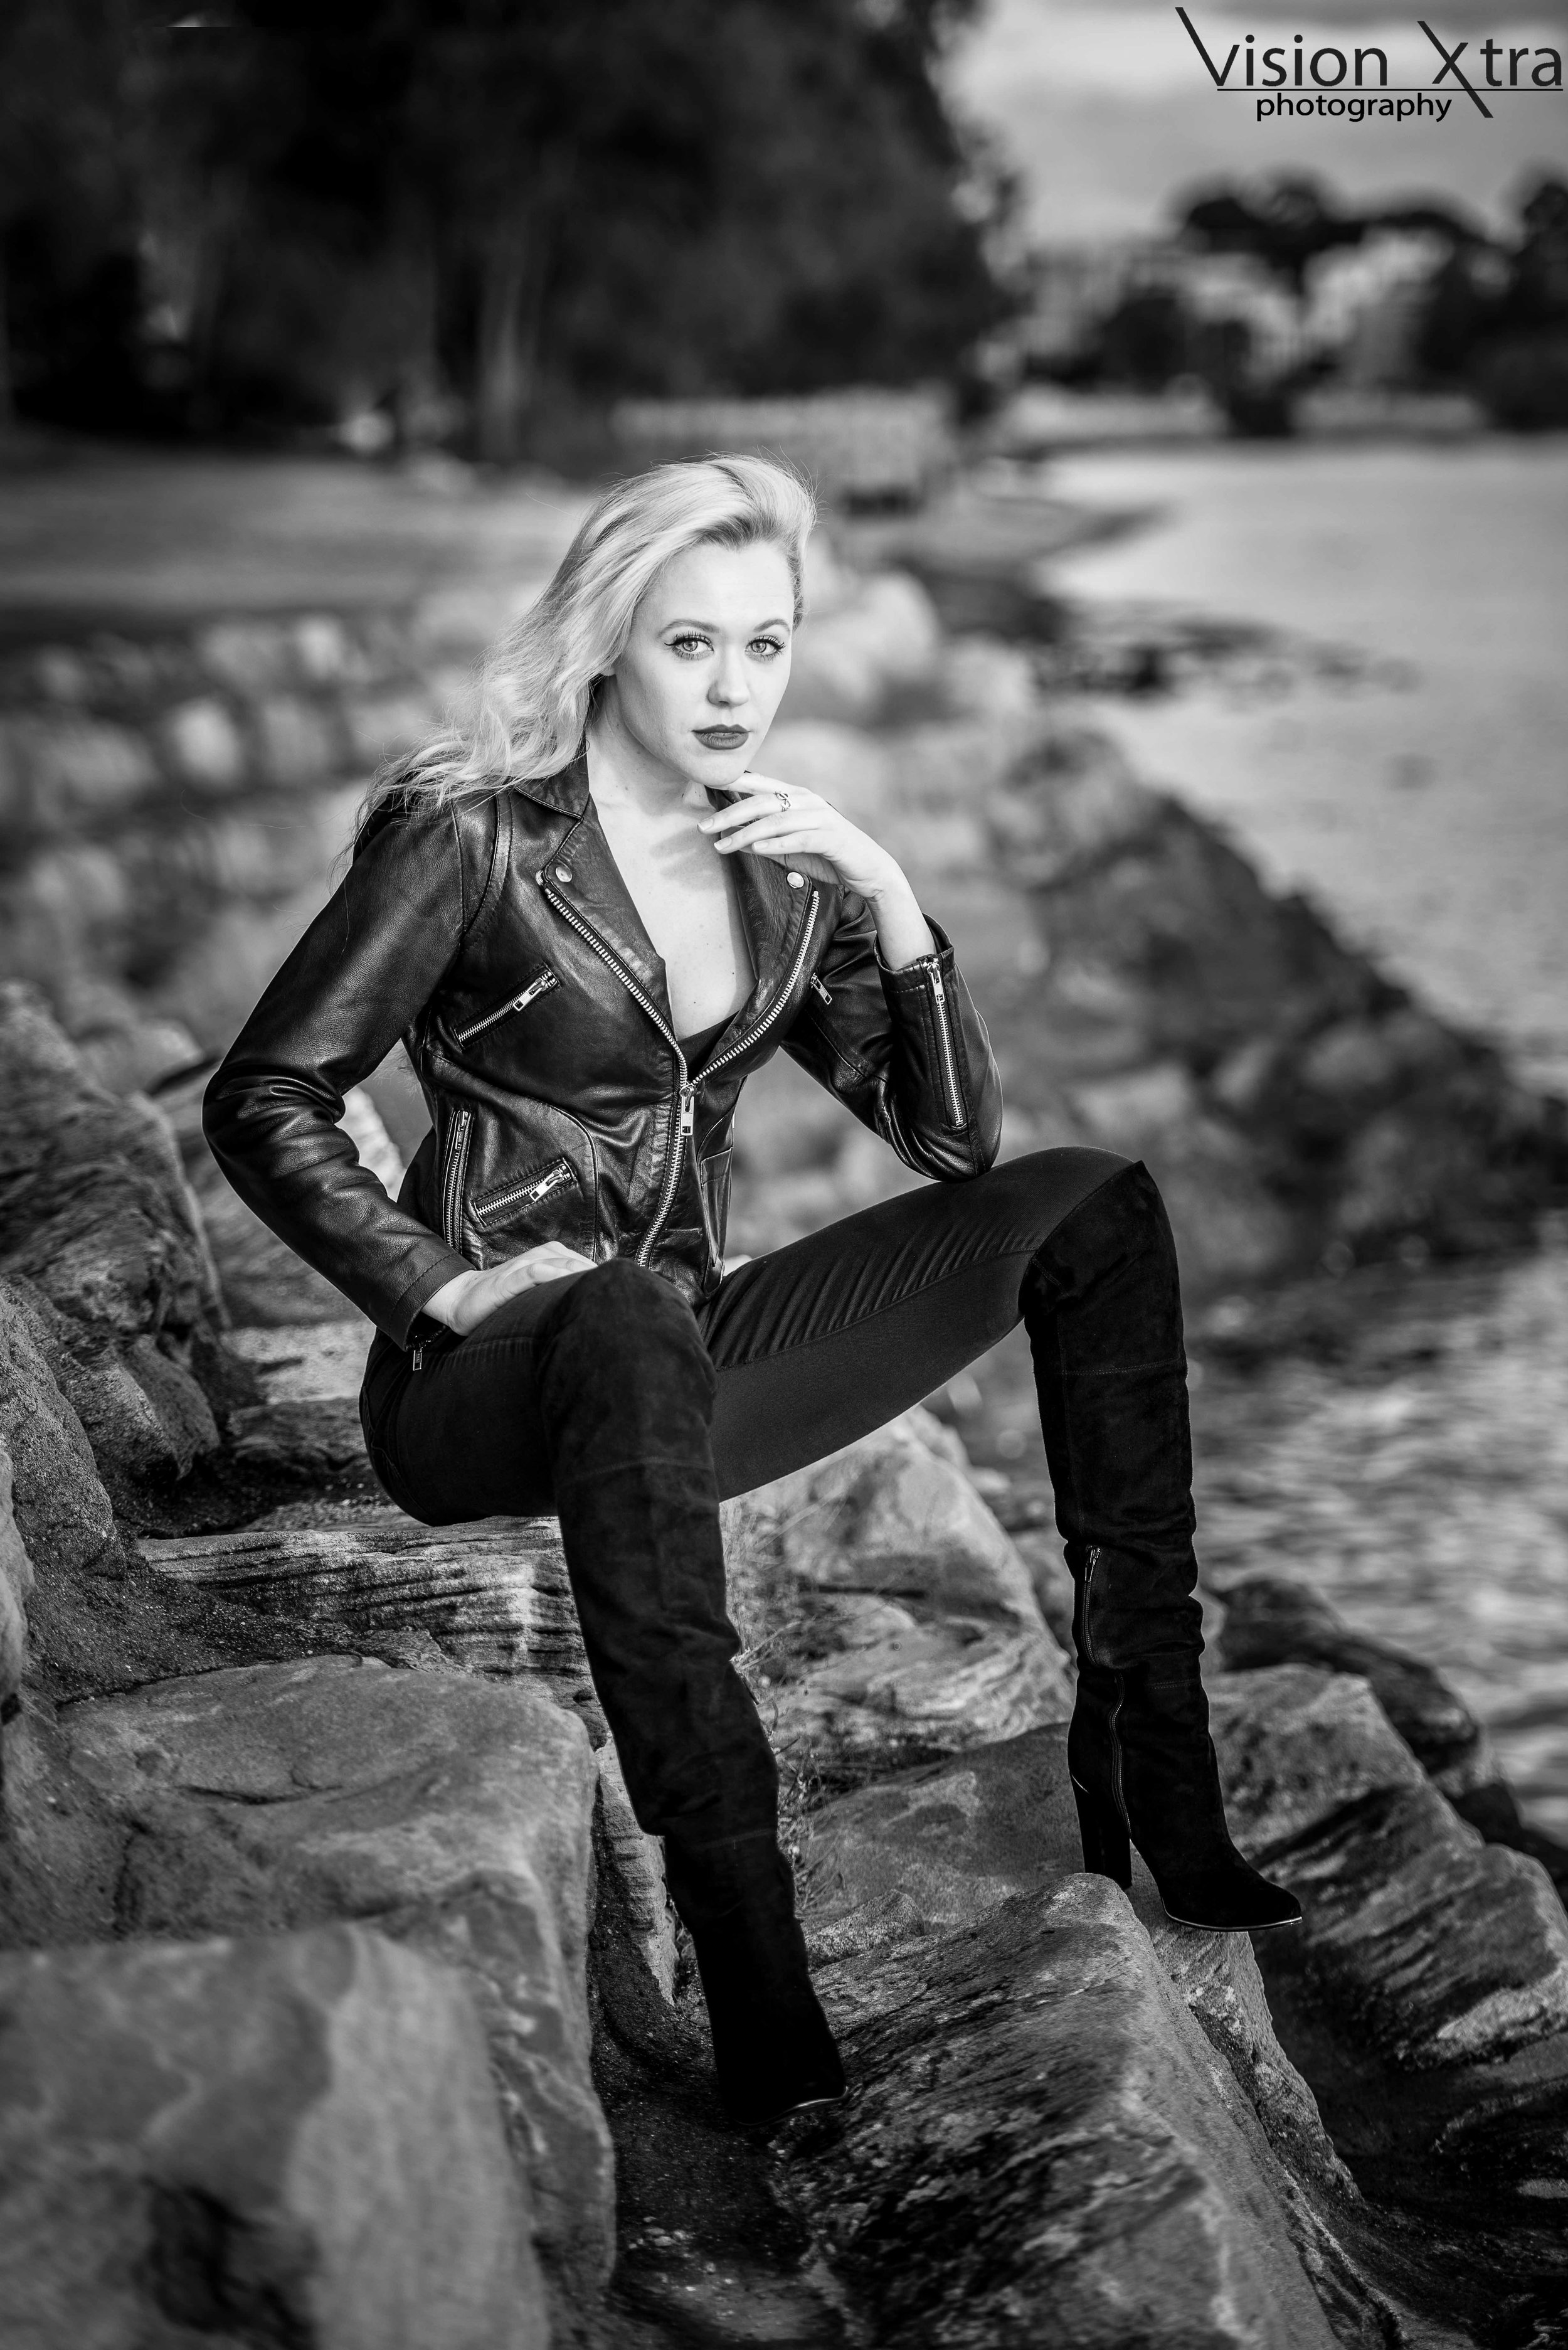 Leather B&W with Vision Xtra CLARA HELMS.jpg